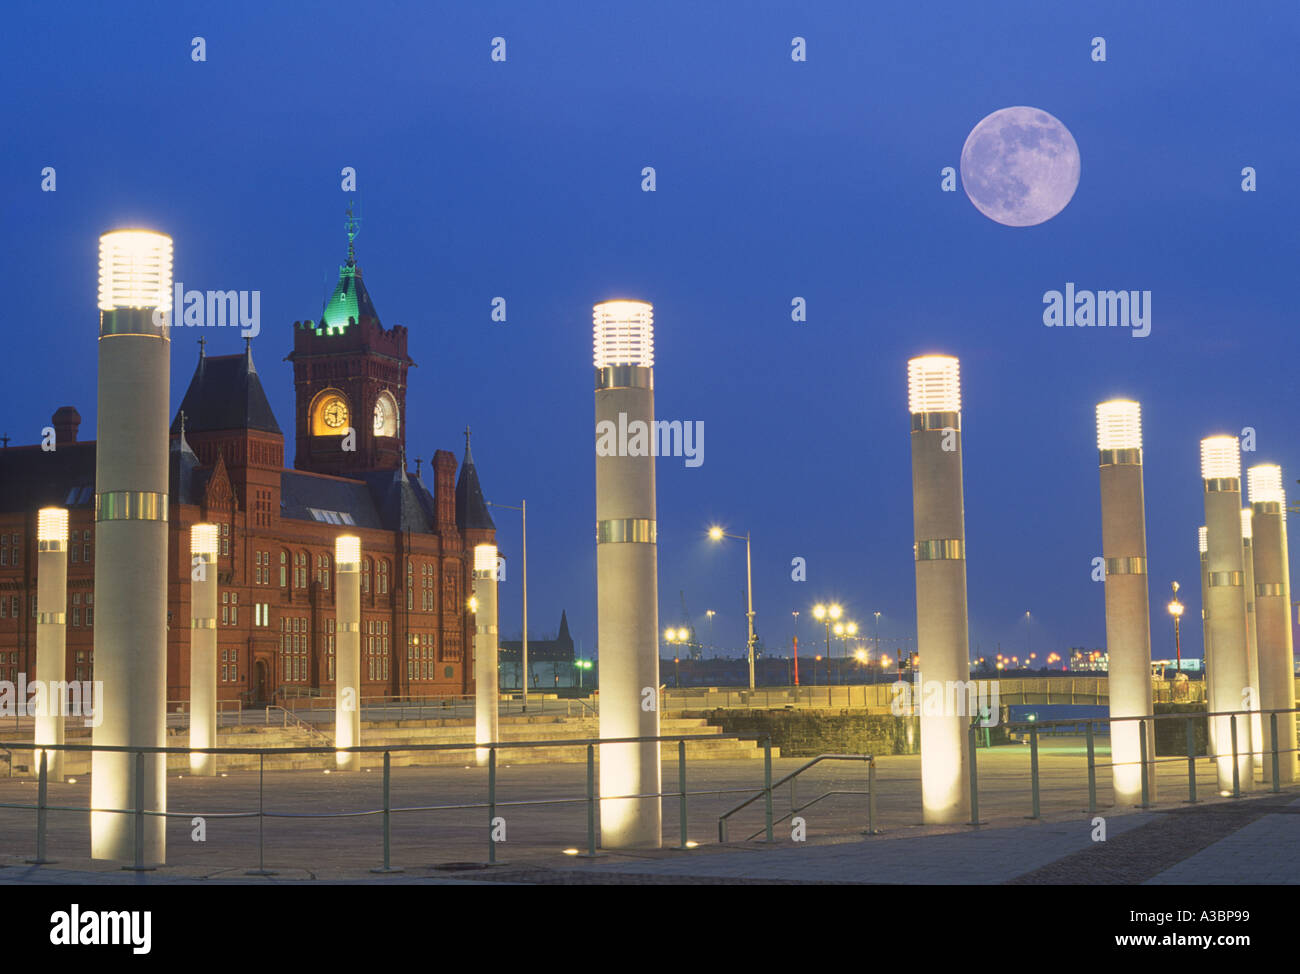 Pierhead Building Oval Basin and Roald Dahl Plass at night Cardiff Bay South Wales Stock Photo